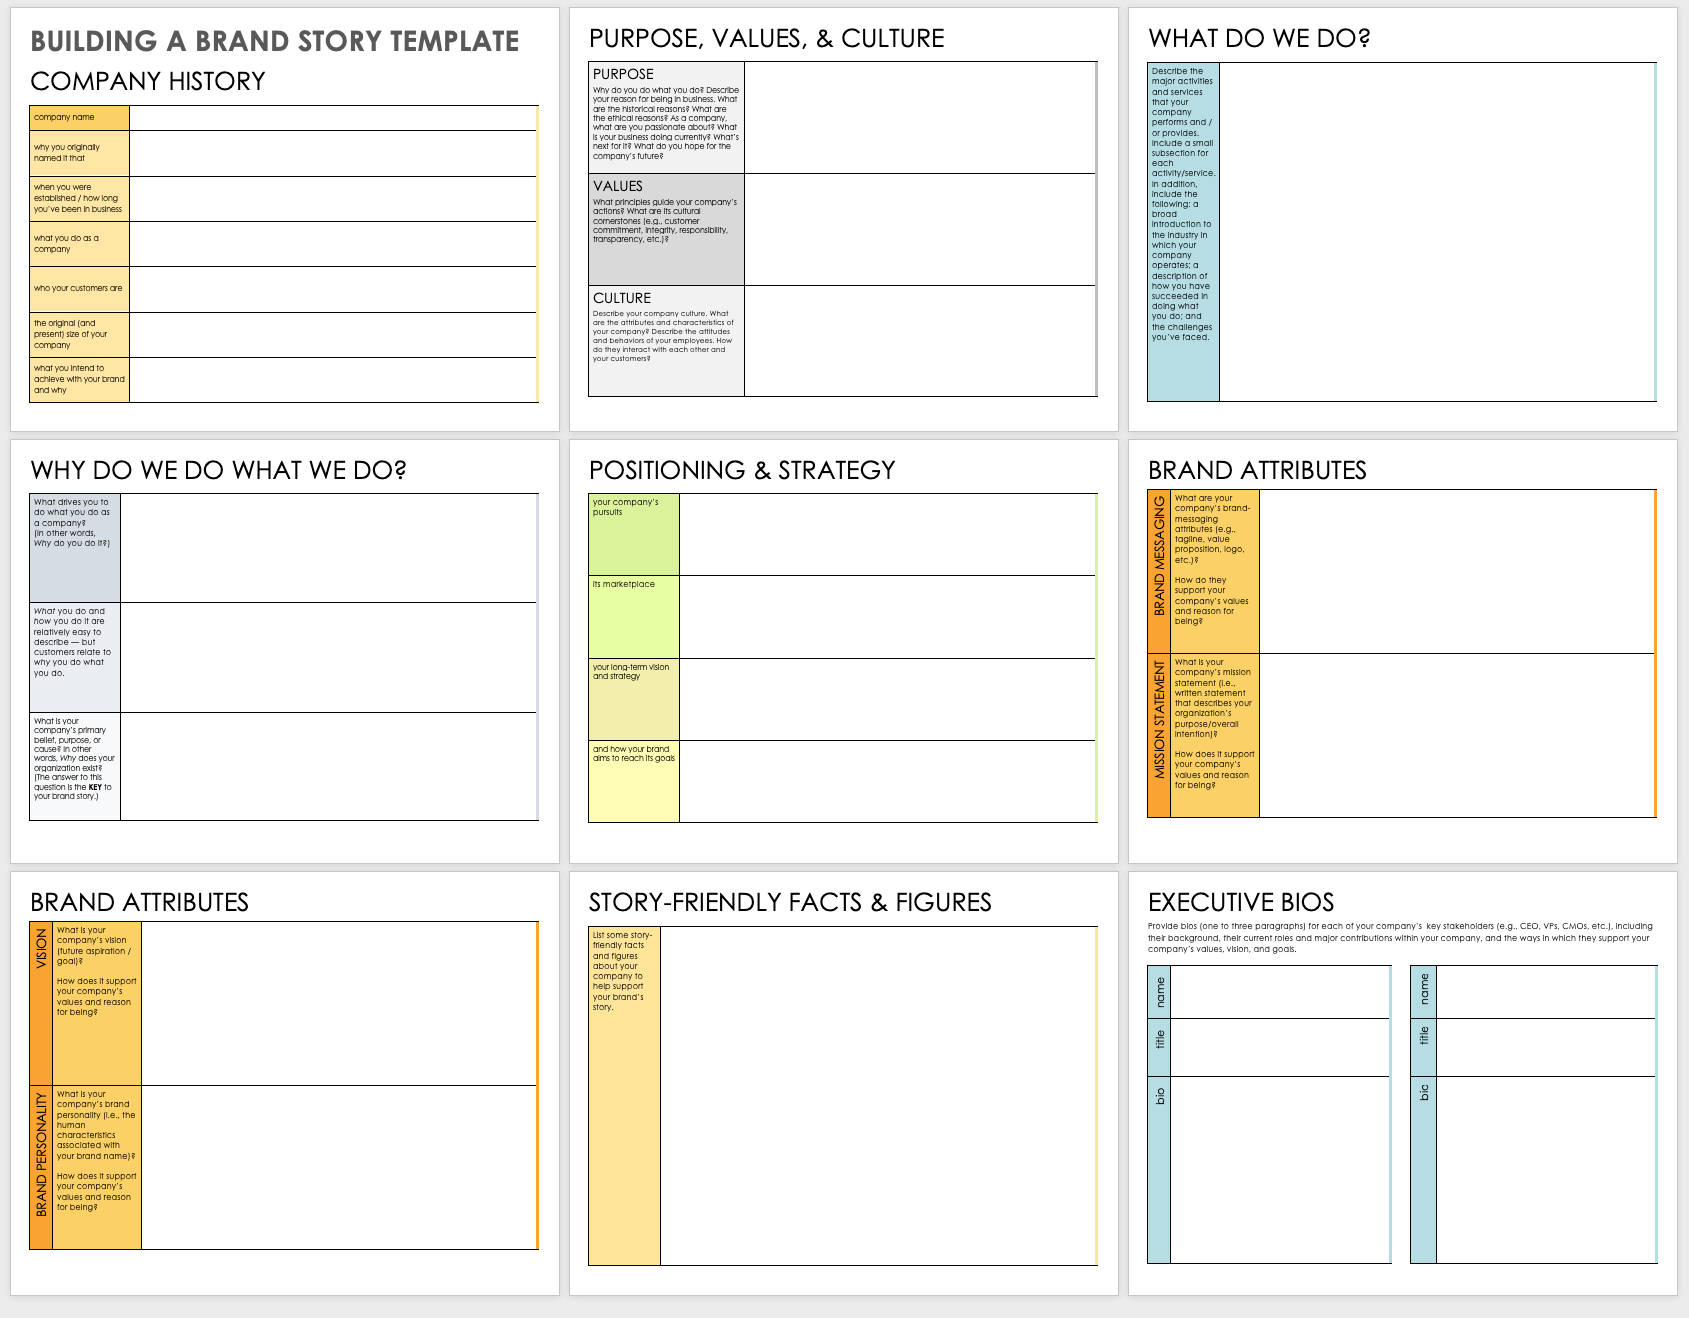 Building a Brand Story Template